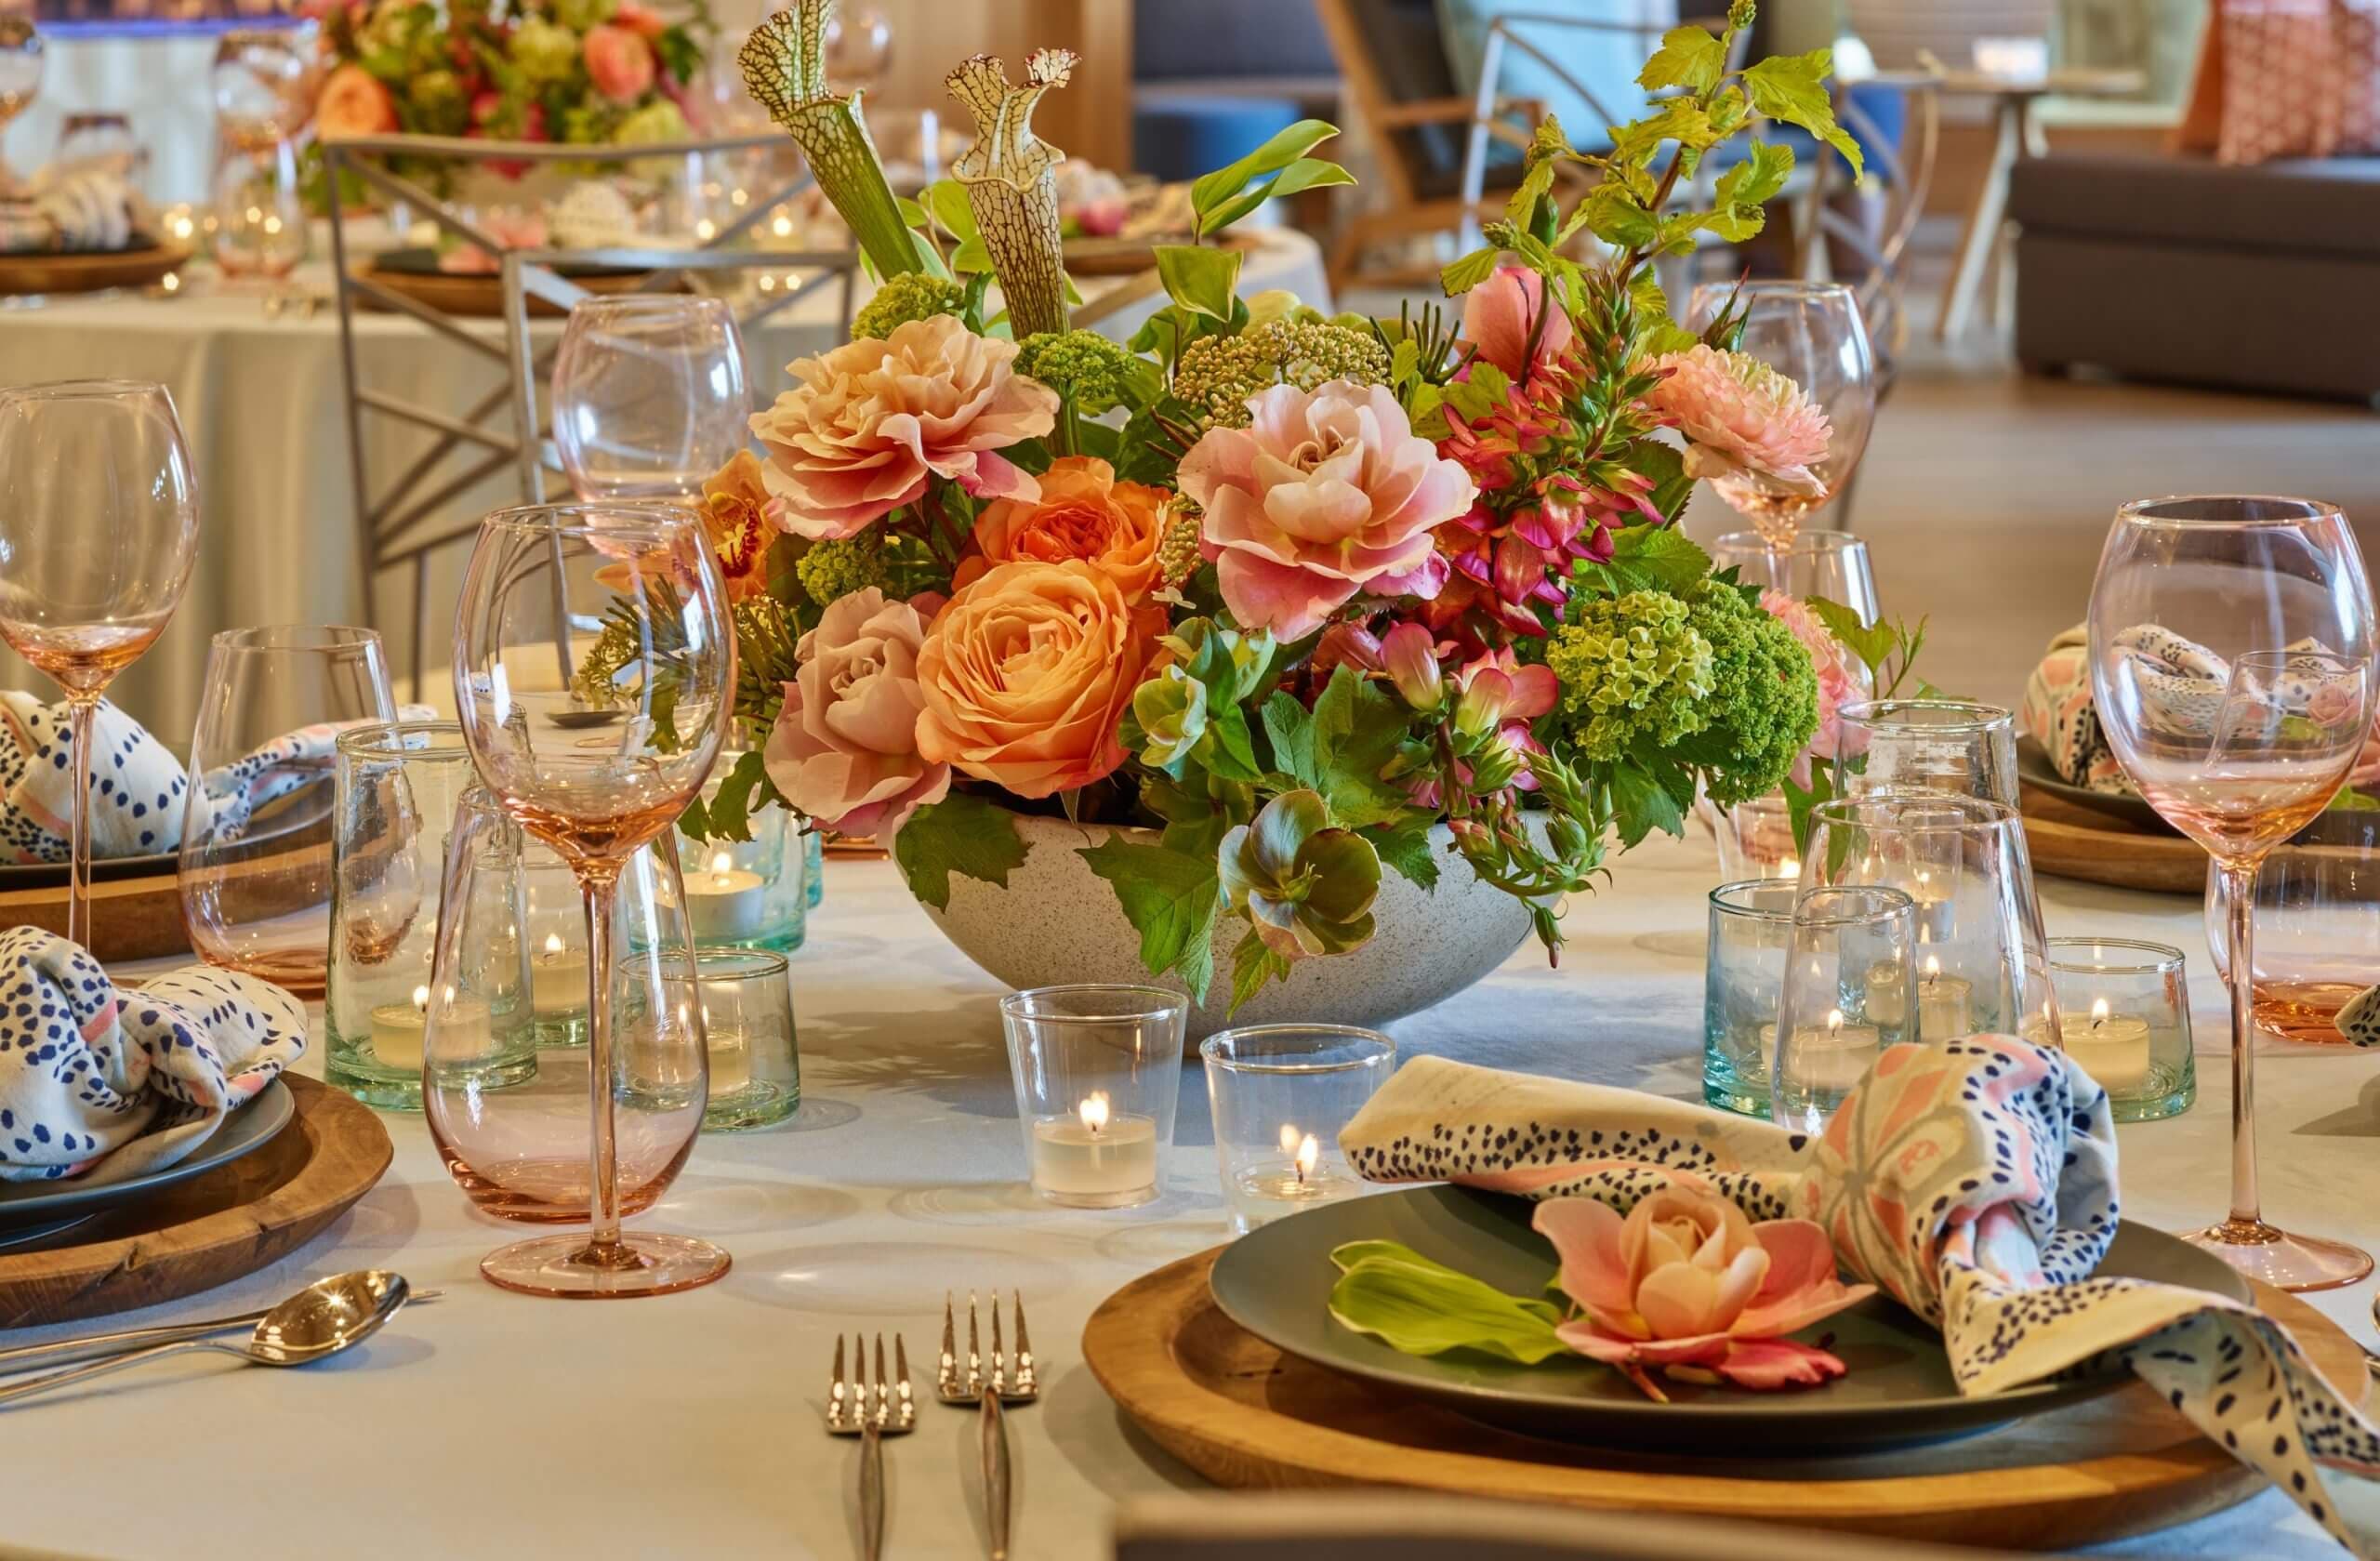 Flowers decorating a dining table